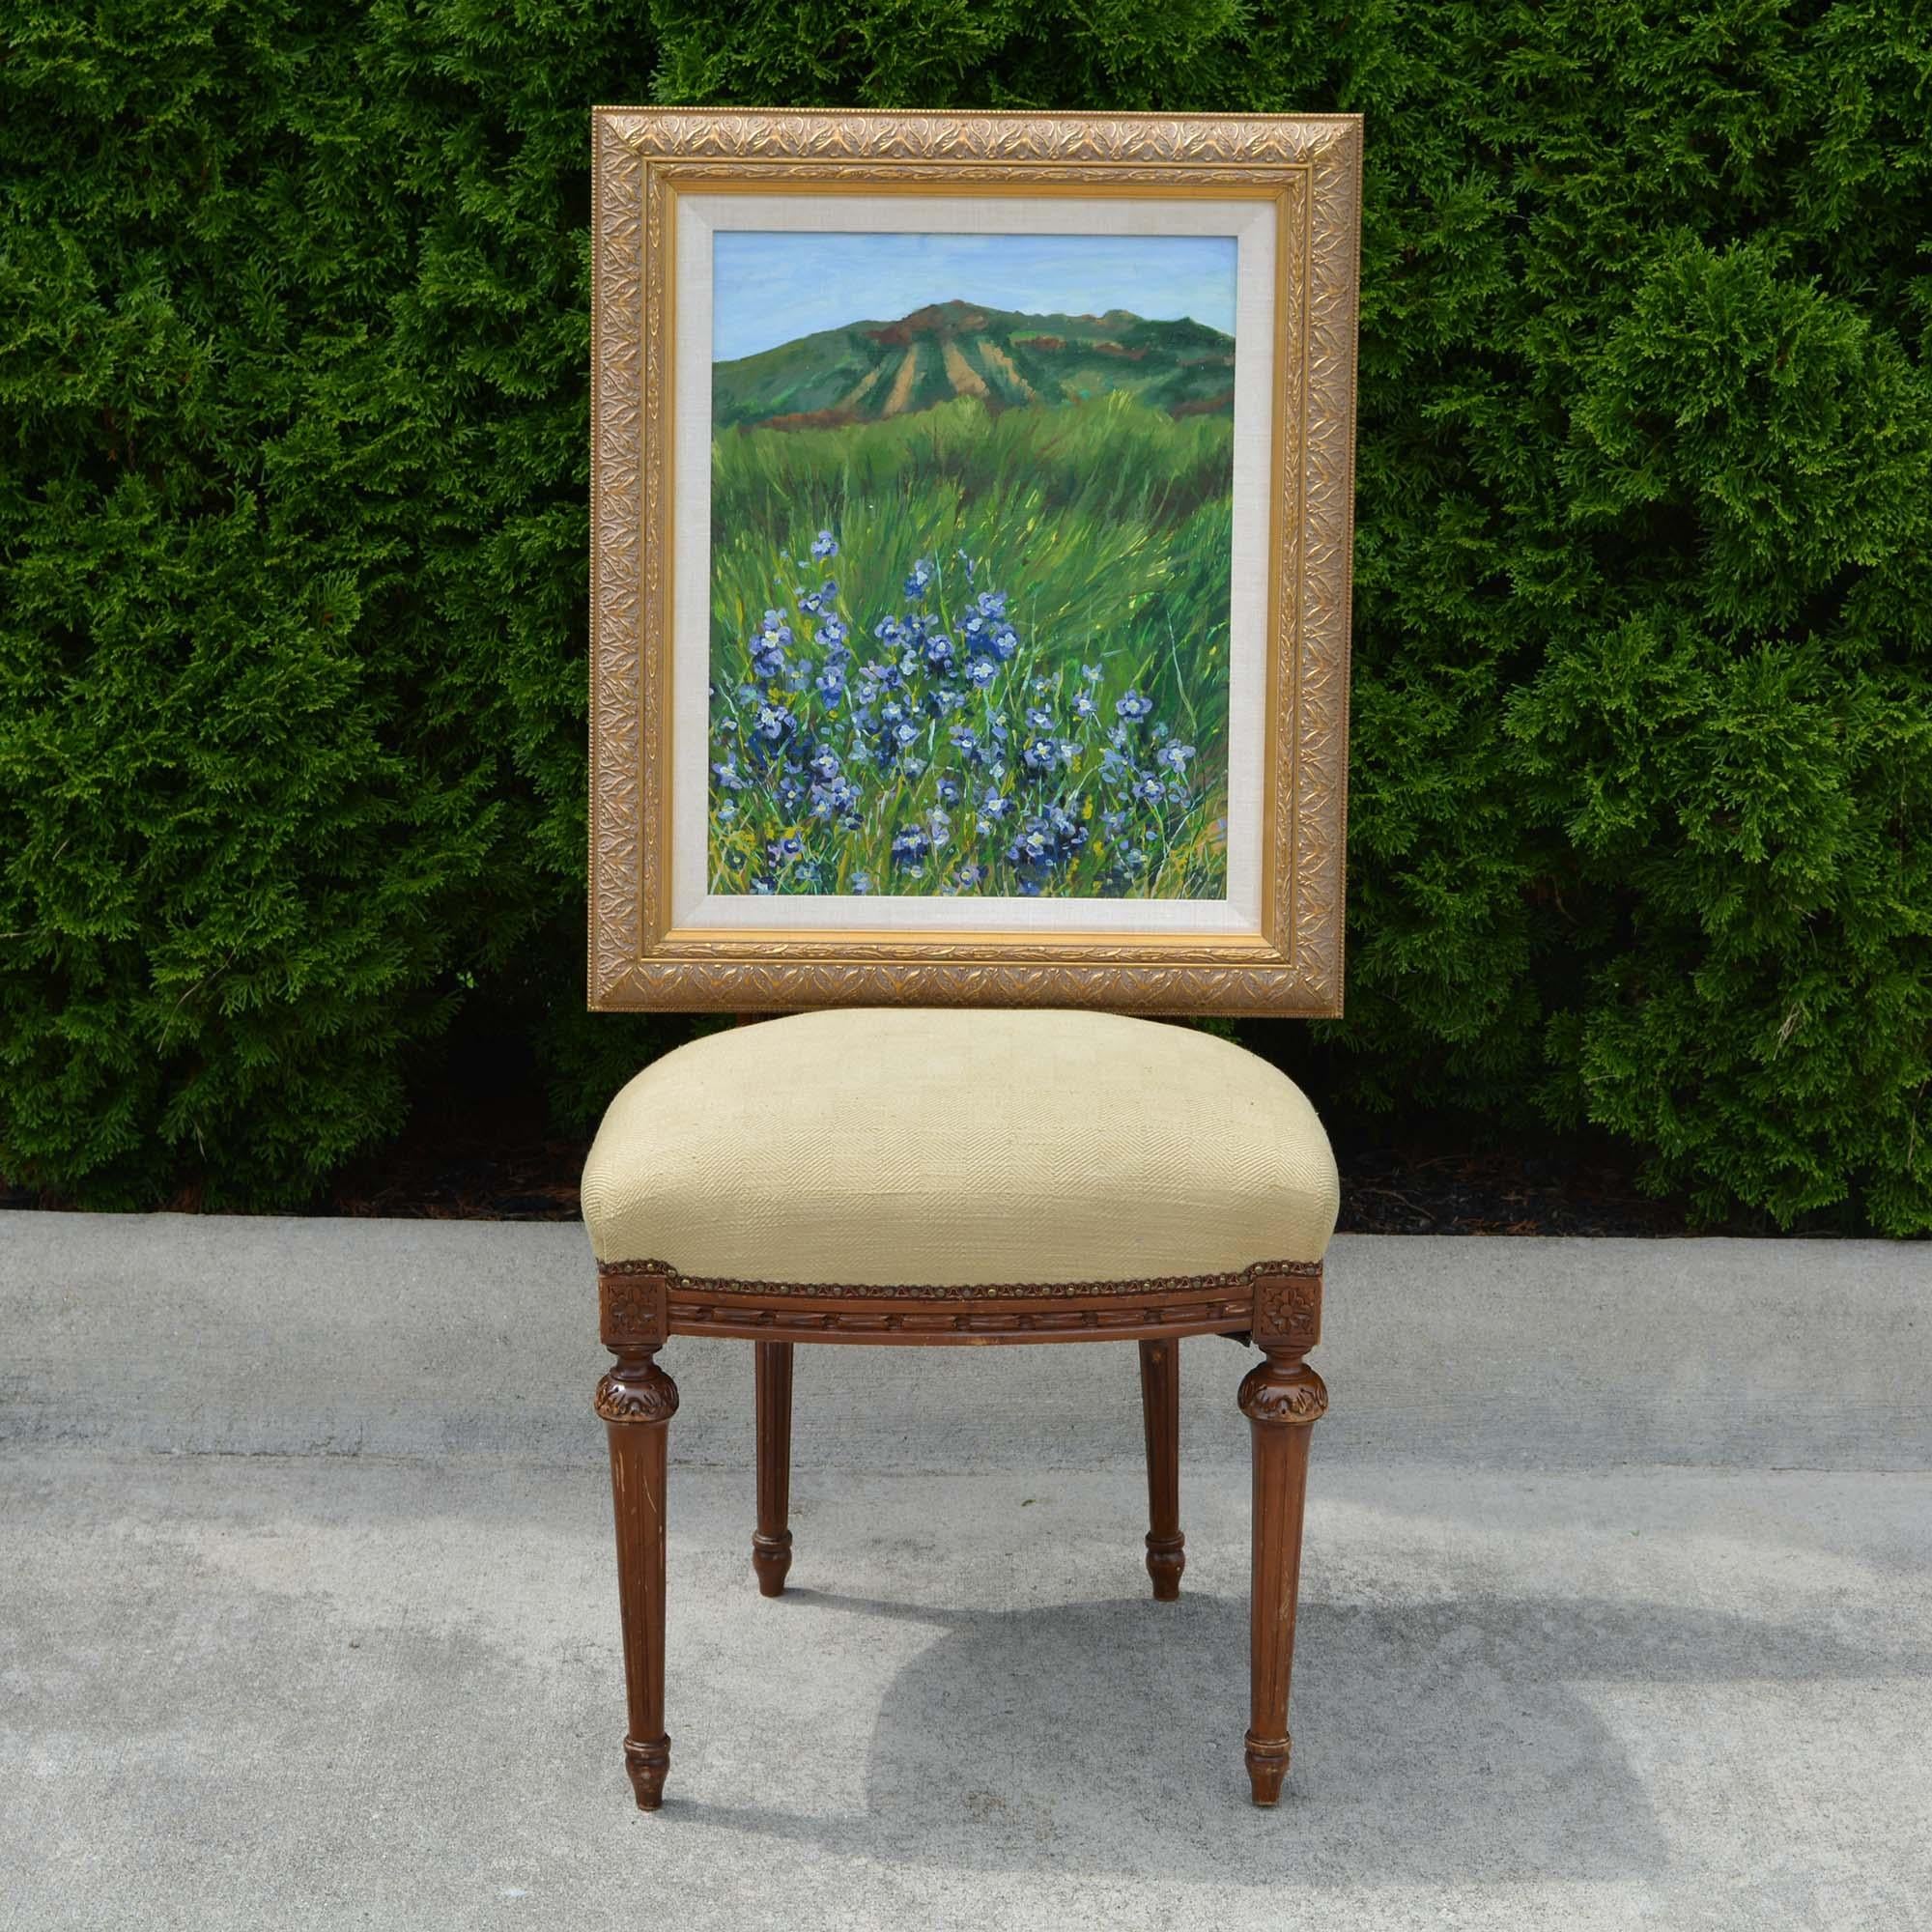 The blue flowers are the focal point of the landscape in this painting. There is a hillside that climbs toward the sky in the background, setting the tone of this lovely countryside. Soft green tones with romantic blues. The canvas is signed L Melle